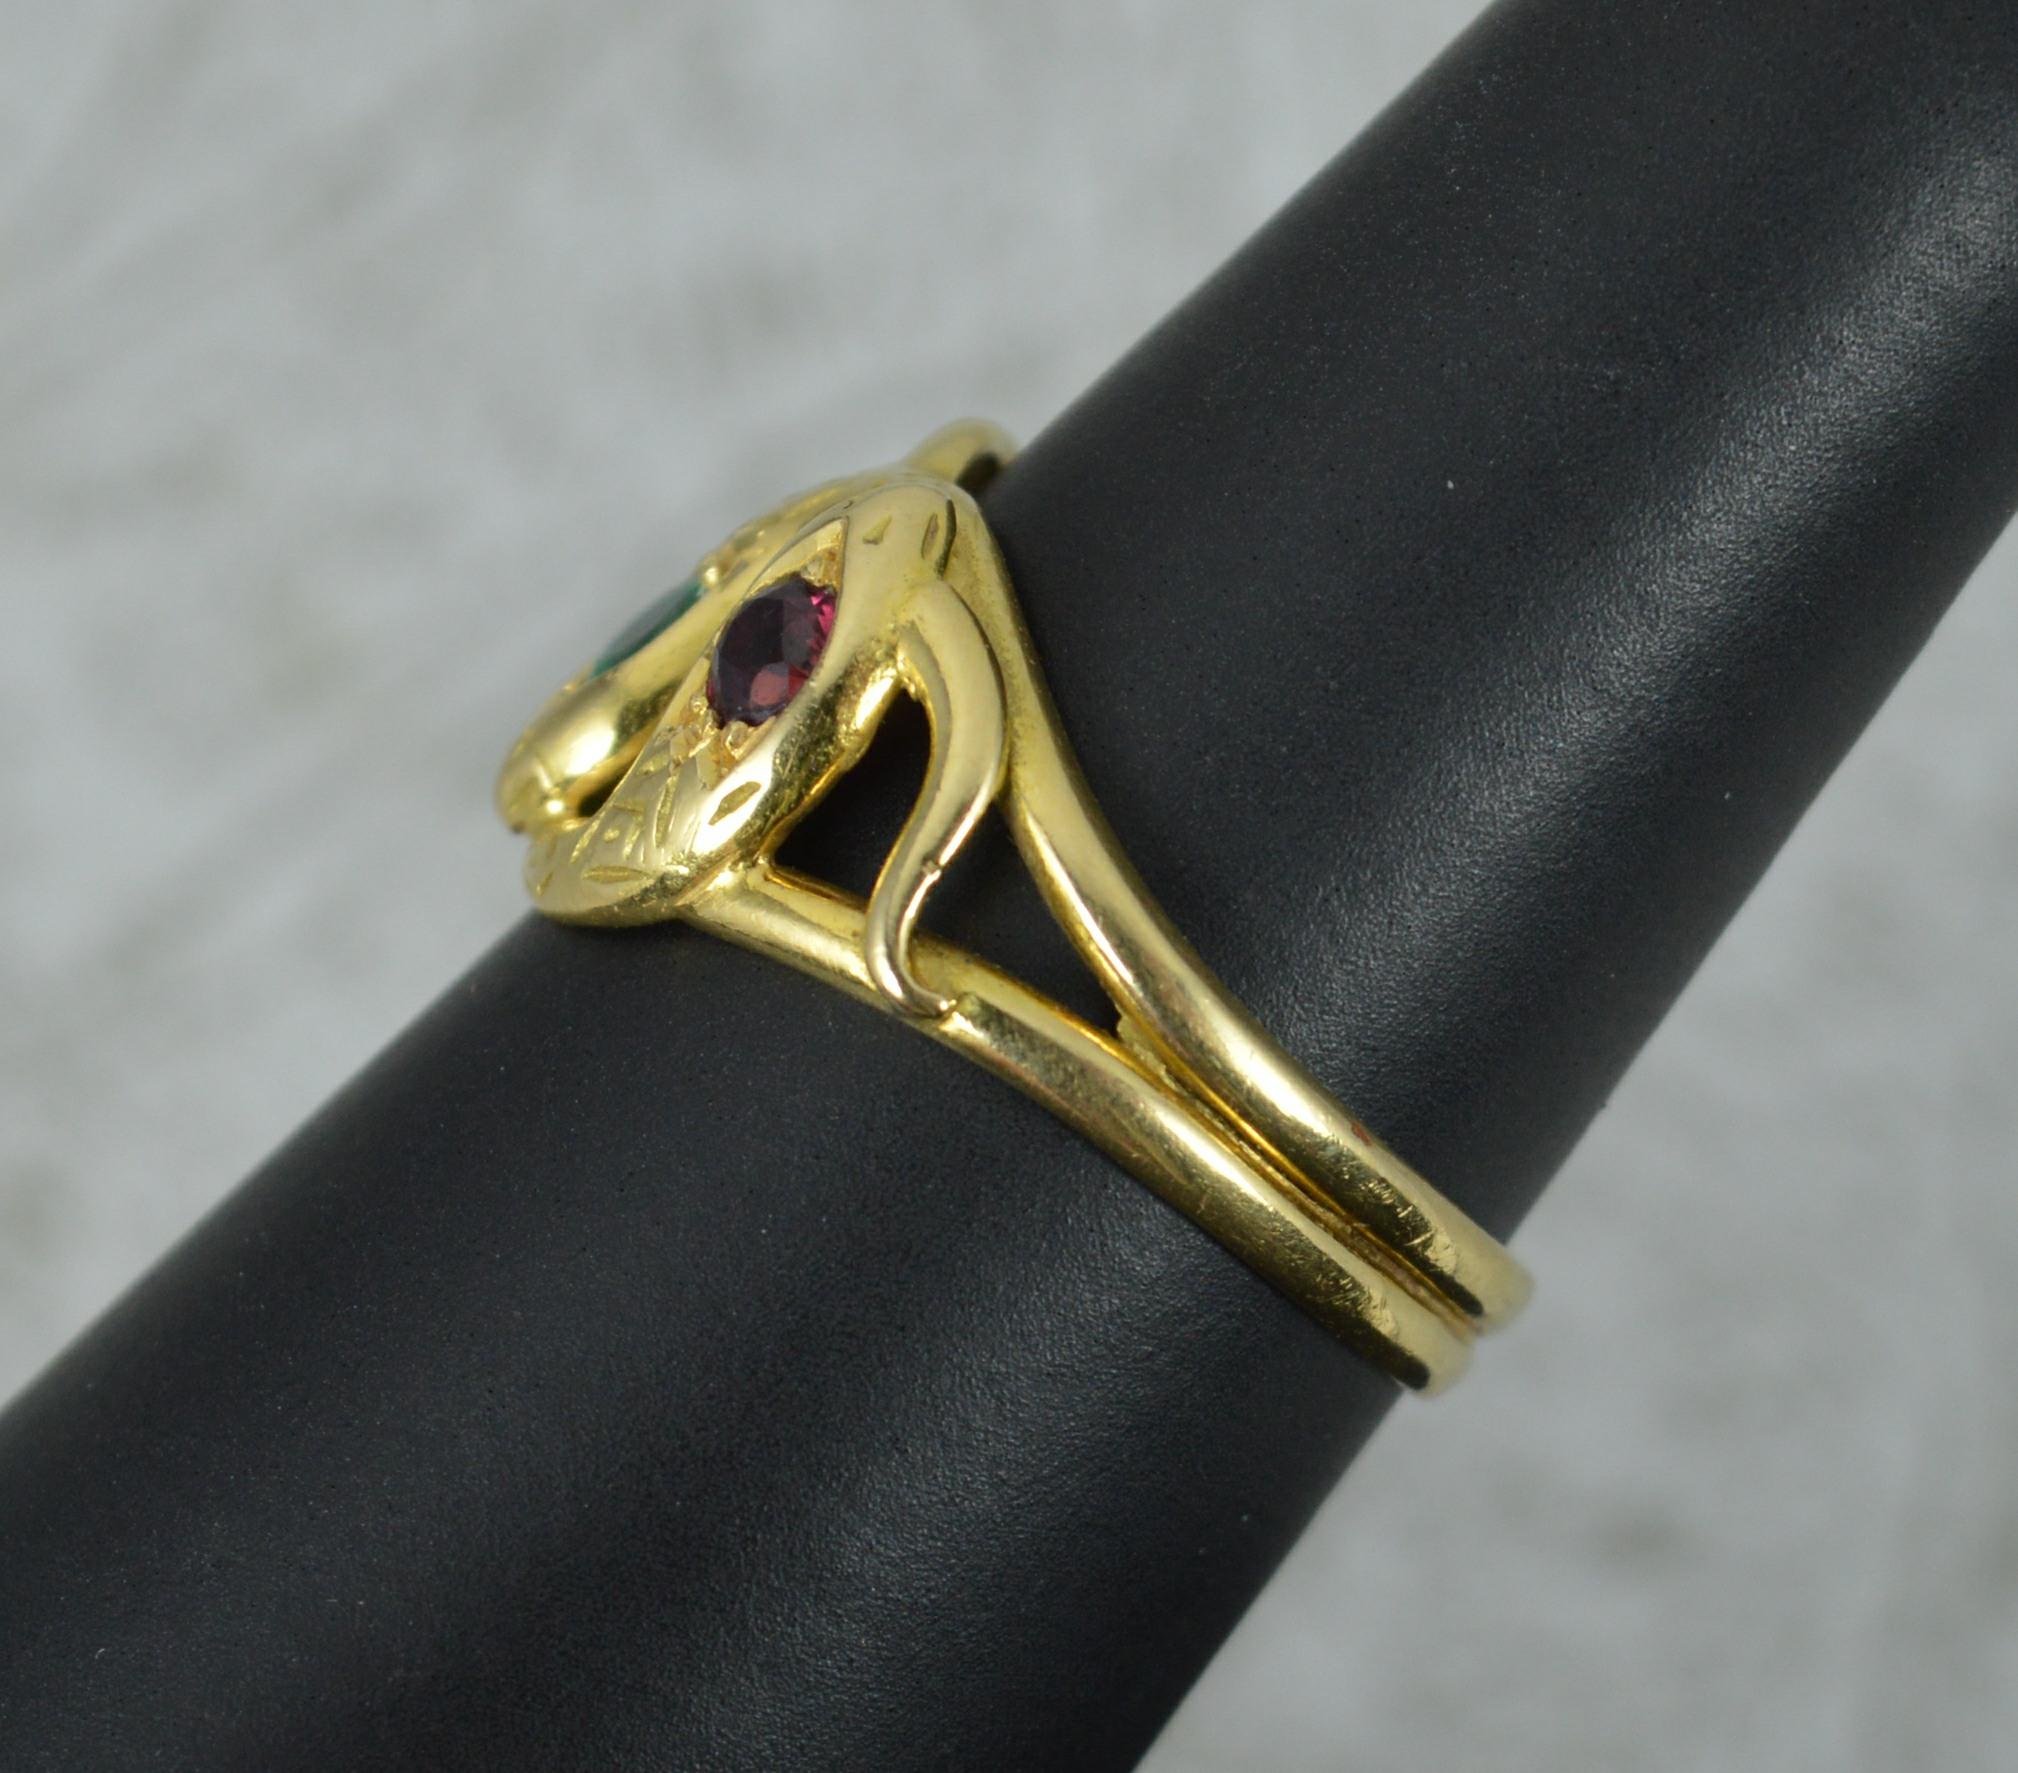 An impressive three snake design ring. Made from solid 18 carat yellow gold. The three snake heads each set with a different gemstone. 17mm x 12mm head.

Condition ; Very good. Strong, round band. Well set stones. Issue free.

Please view